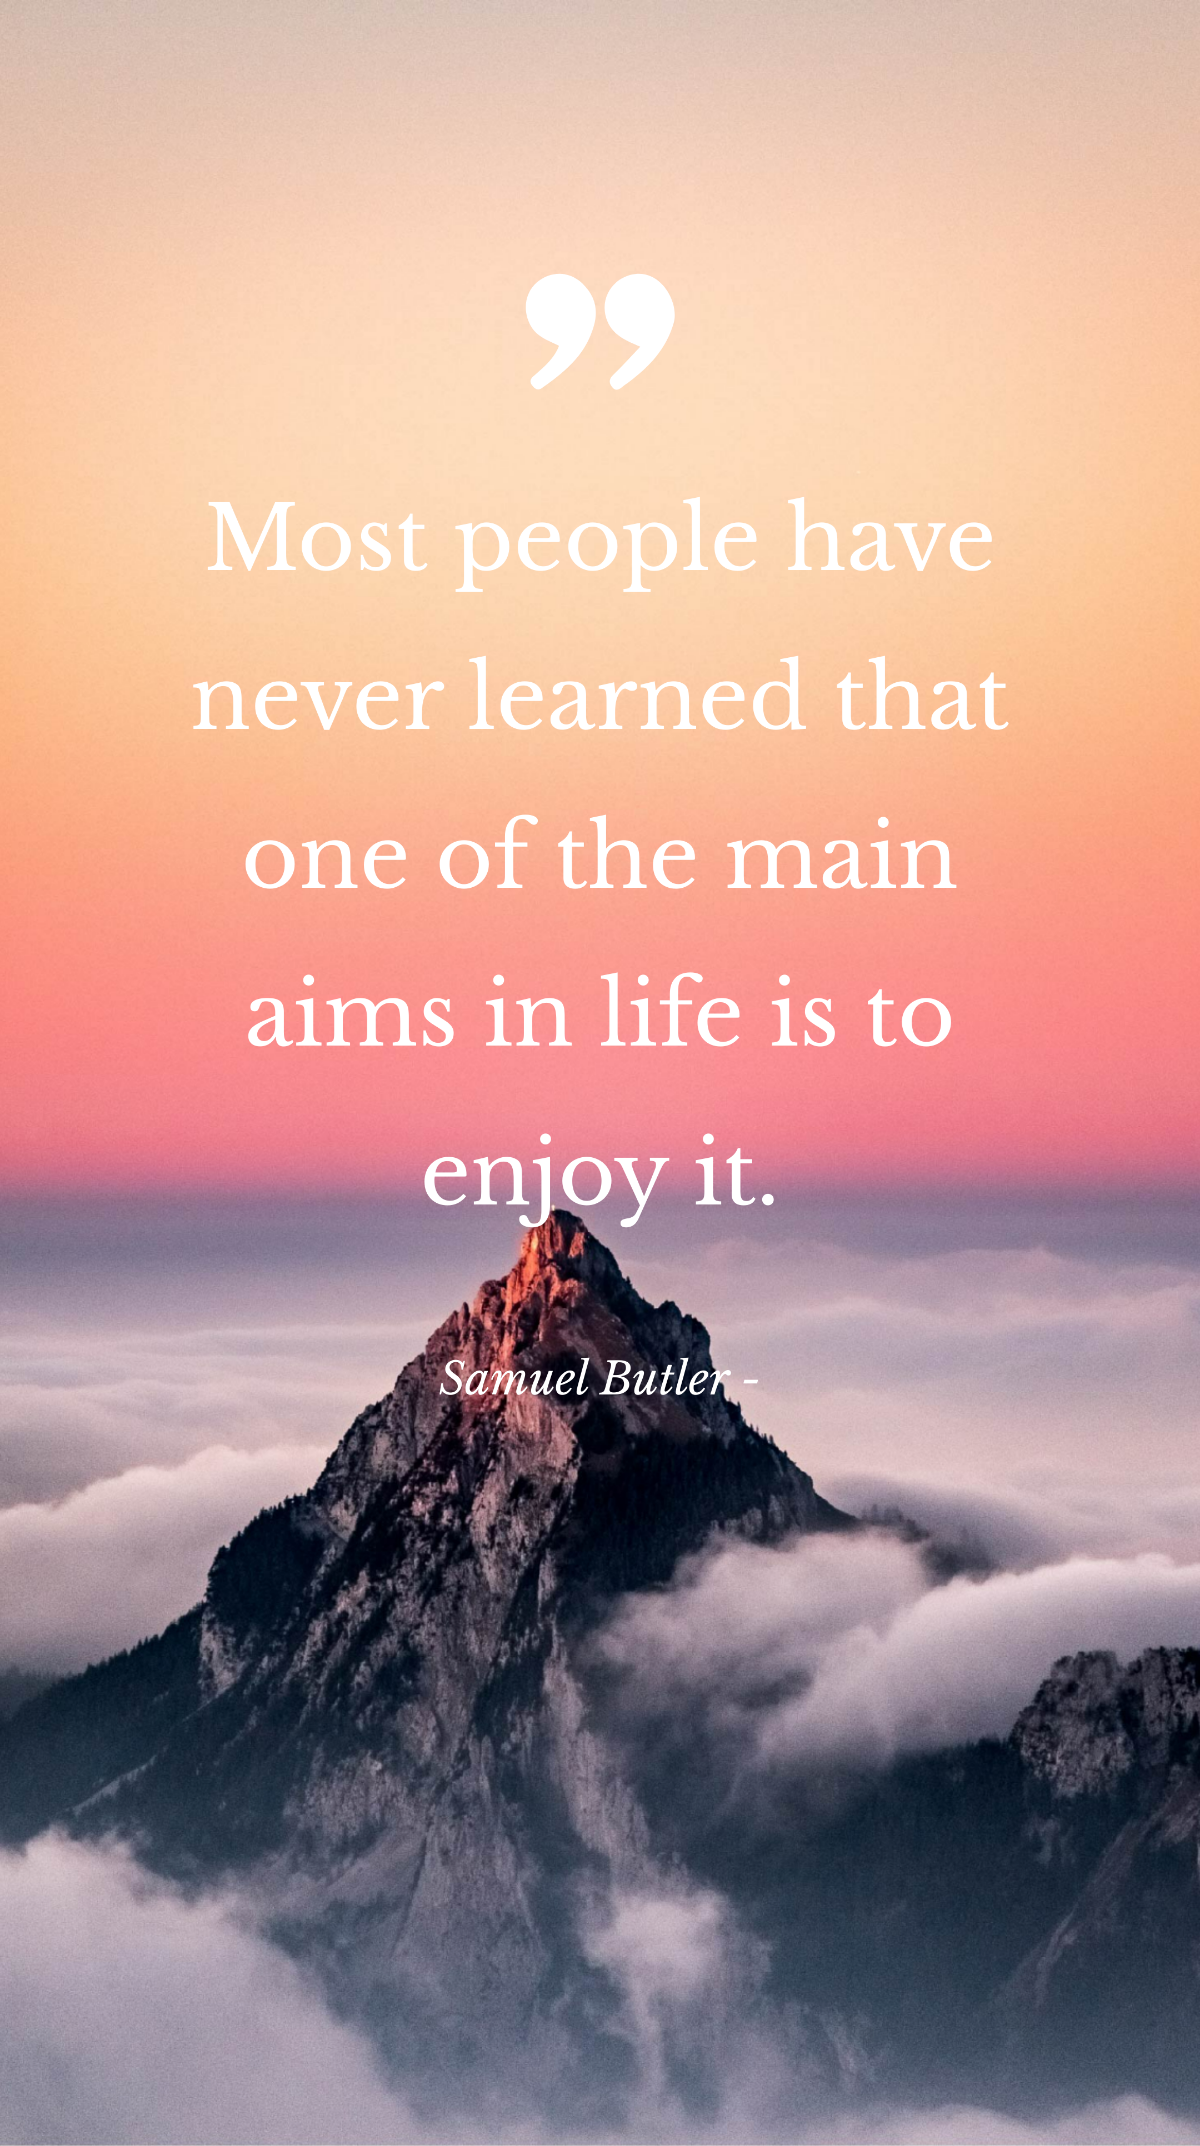 Samuel Butler - Most people have never learned that one of the main aims in life is to enjoy it. Template